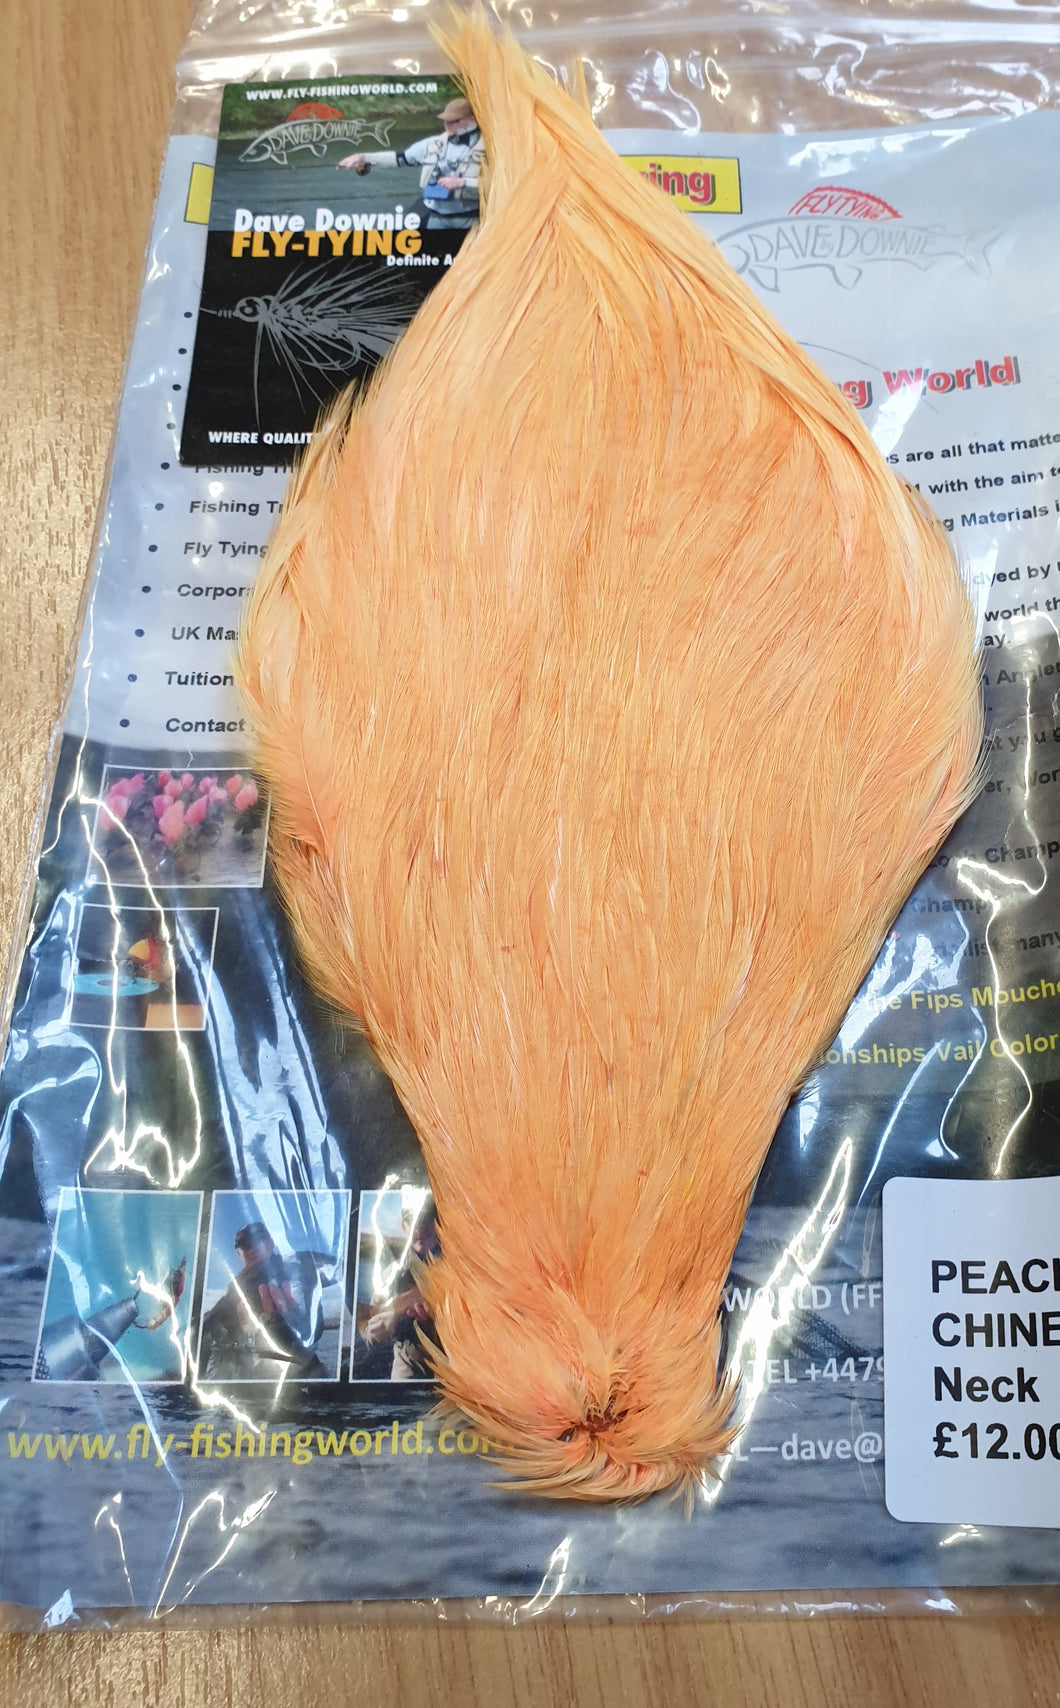 Dyed Peach Chinese Cock Capes